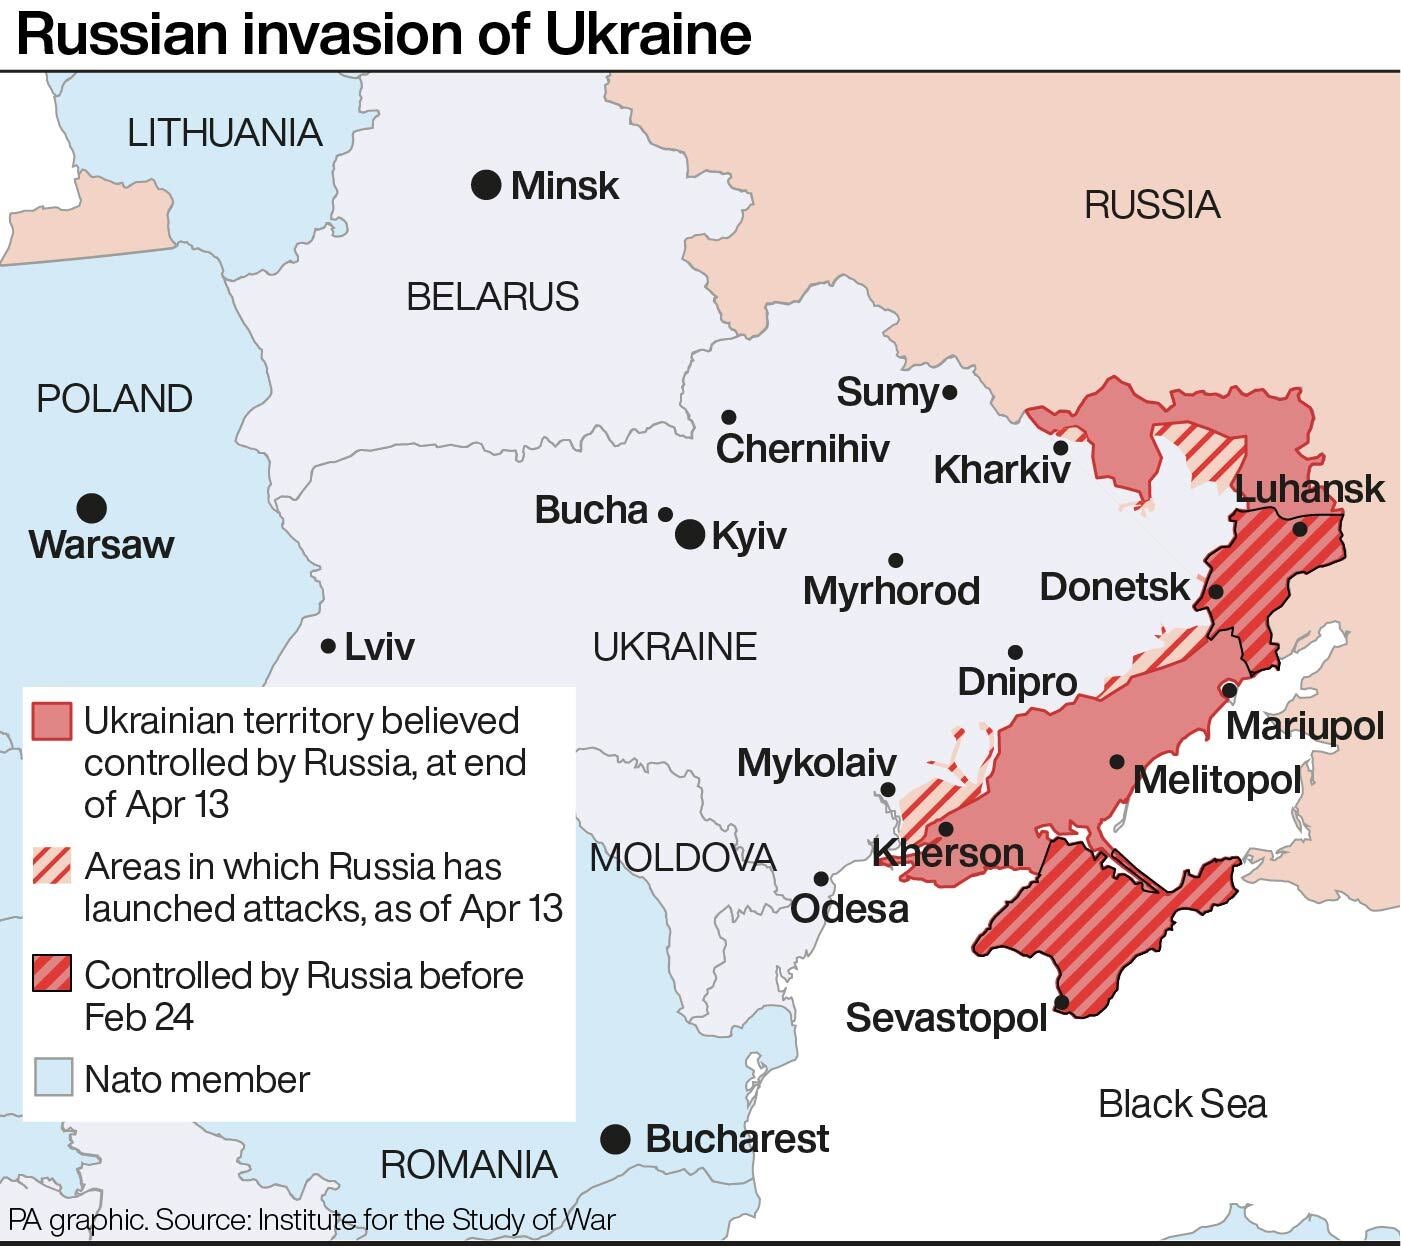 This map shows the extent of the Russian invasion of Ukraine as of 13 April